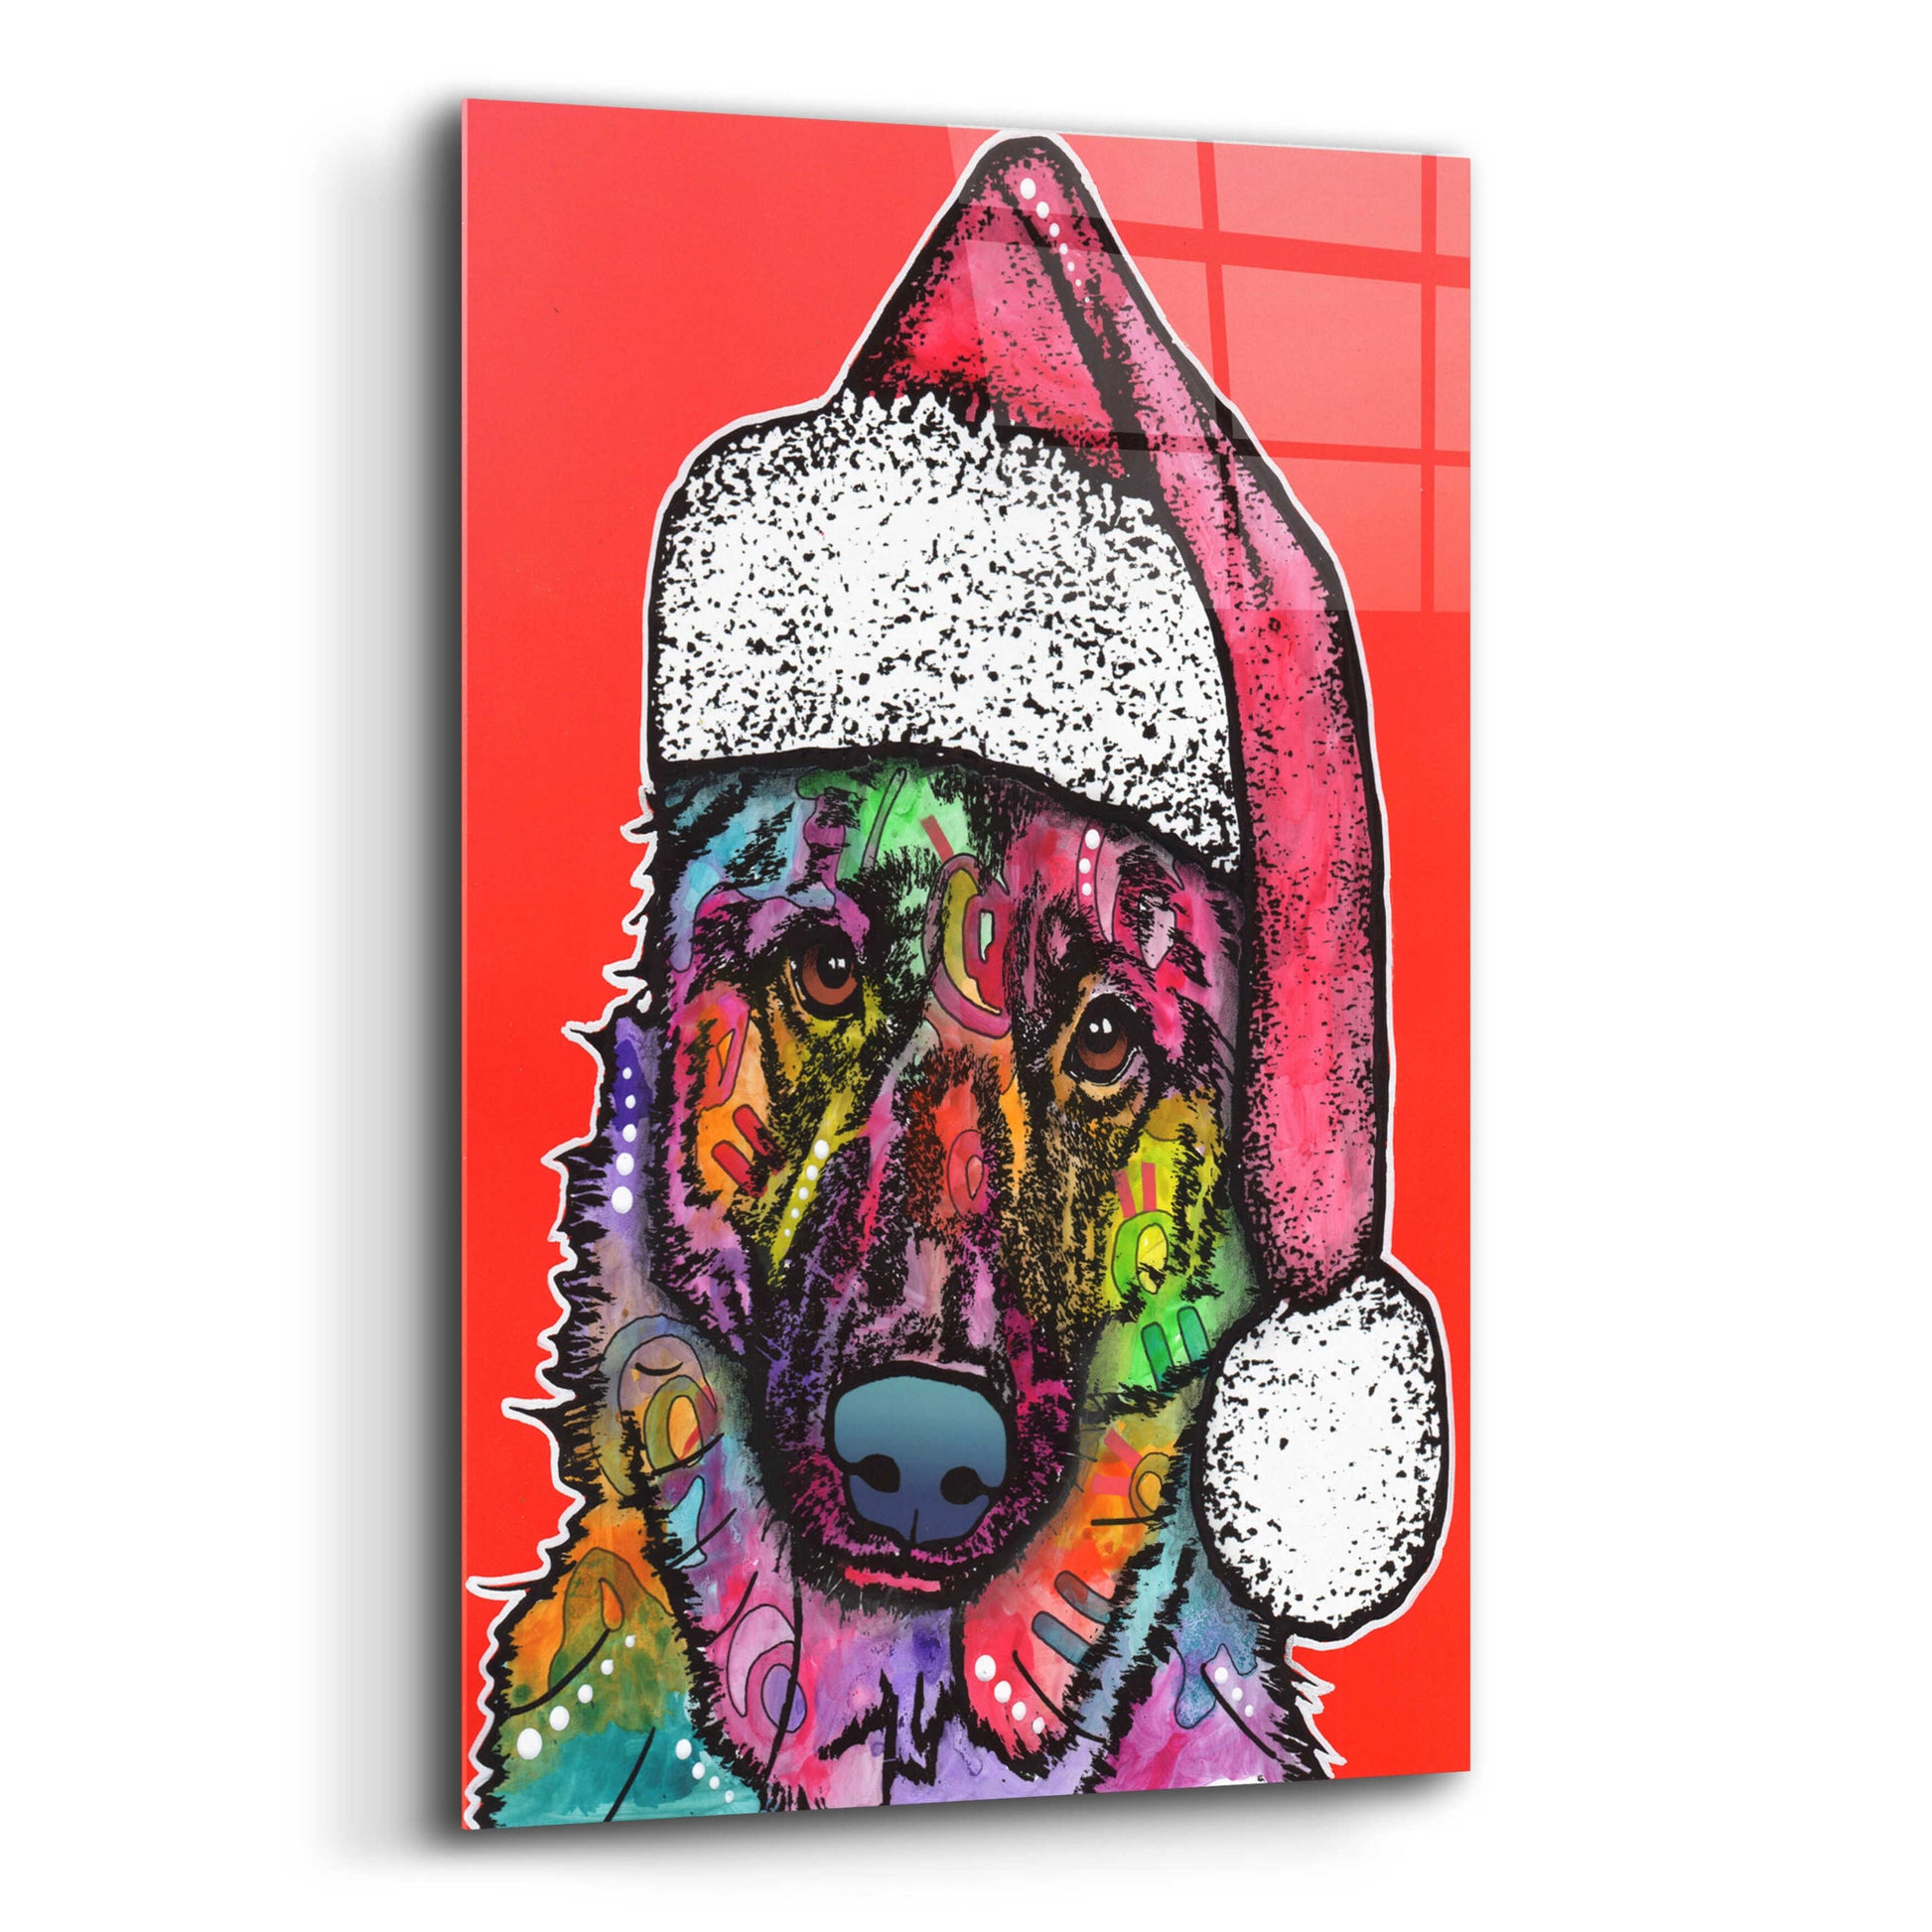 Epic Art 'Christmas Dog' by Dean Russo, Acrylic Glass Wall Art,16x24